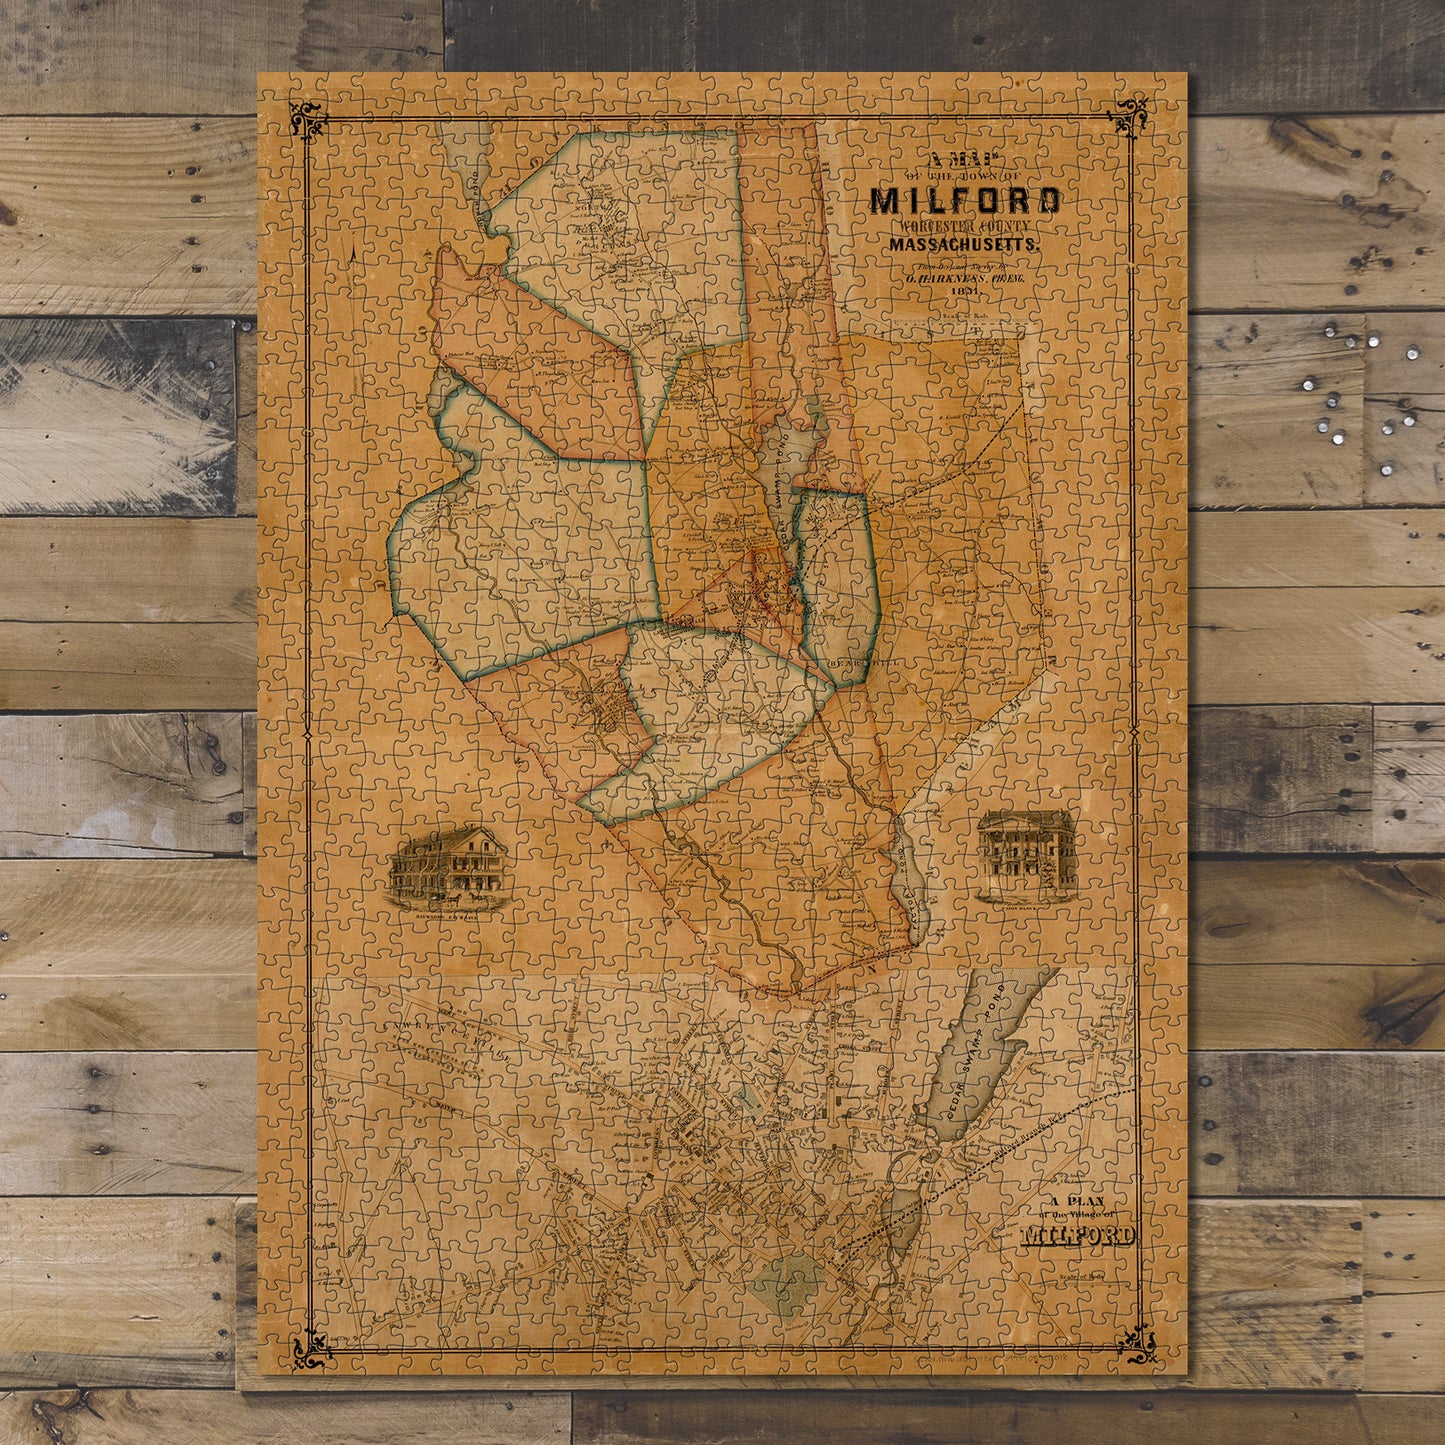 1000 Piece Jigsaw Puzzle 1851 Map | Worcester | Milford of the town of Milford, Worcest